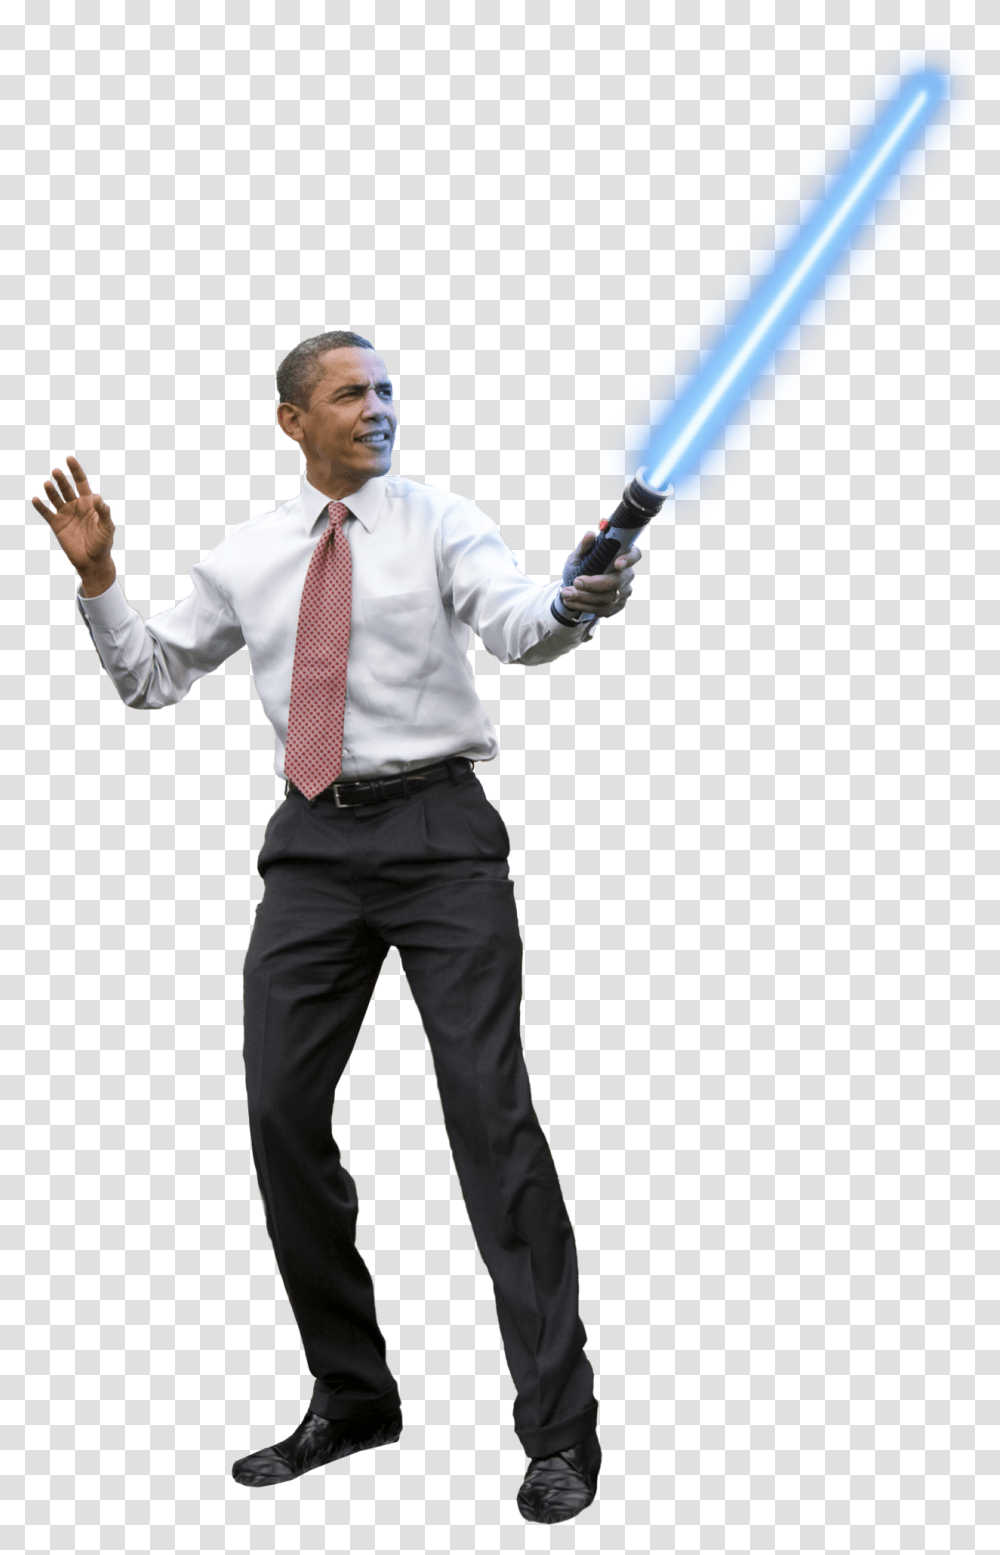 Obama Holding A Lightsaber Outside Of The Whitehousehmmmphotoshop White House, Tie, Person, Shirt Transparent Png